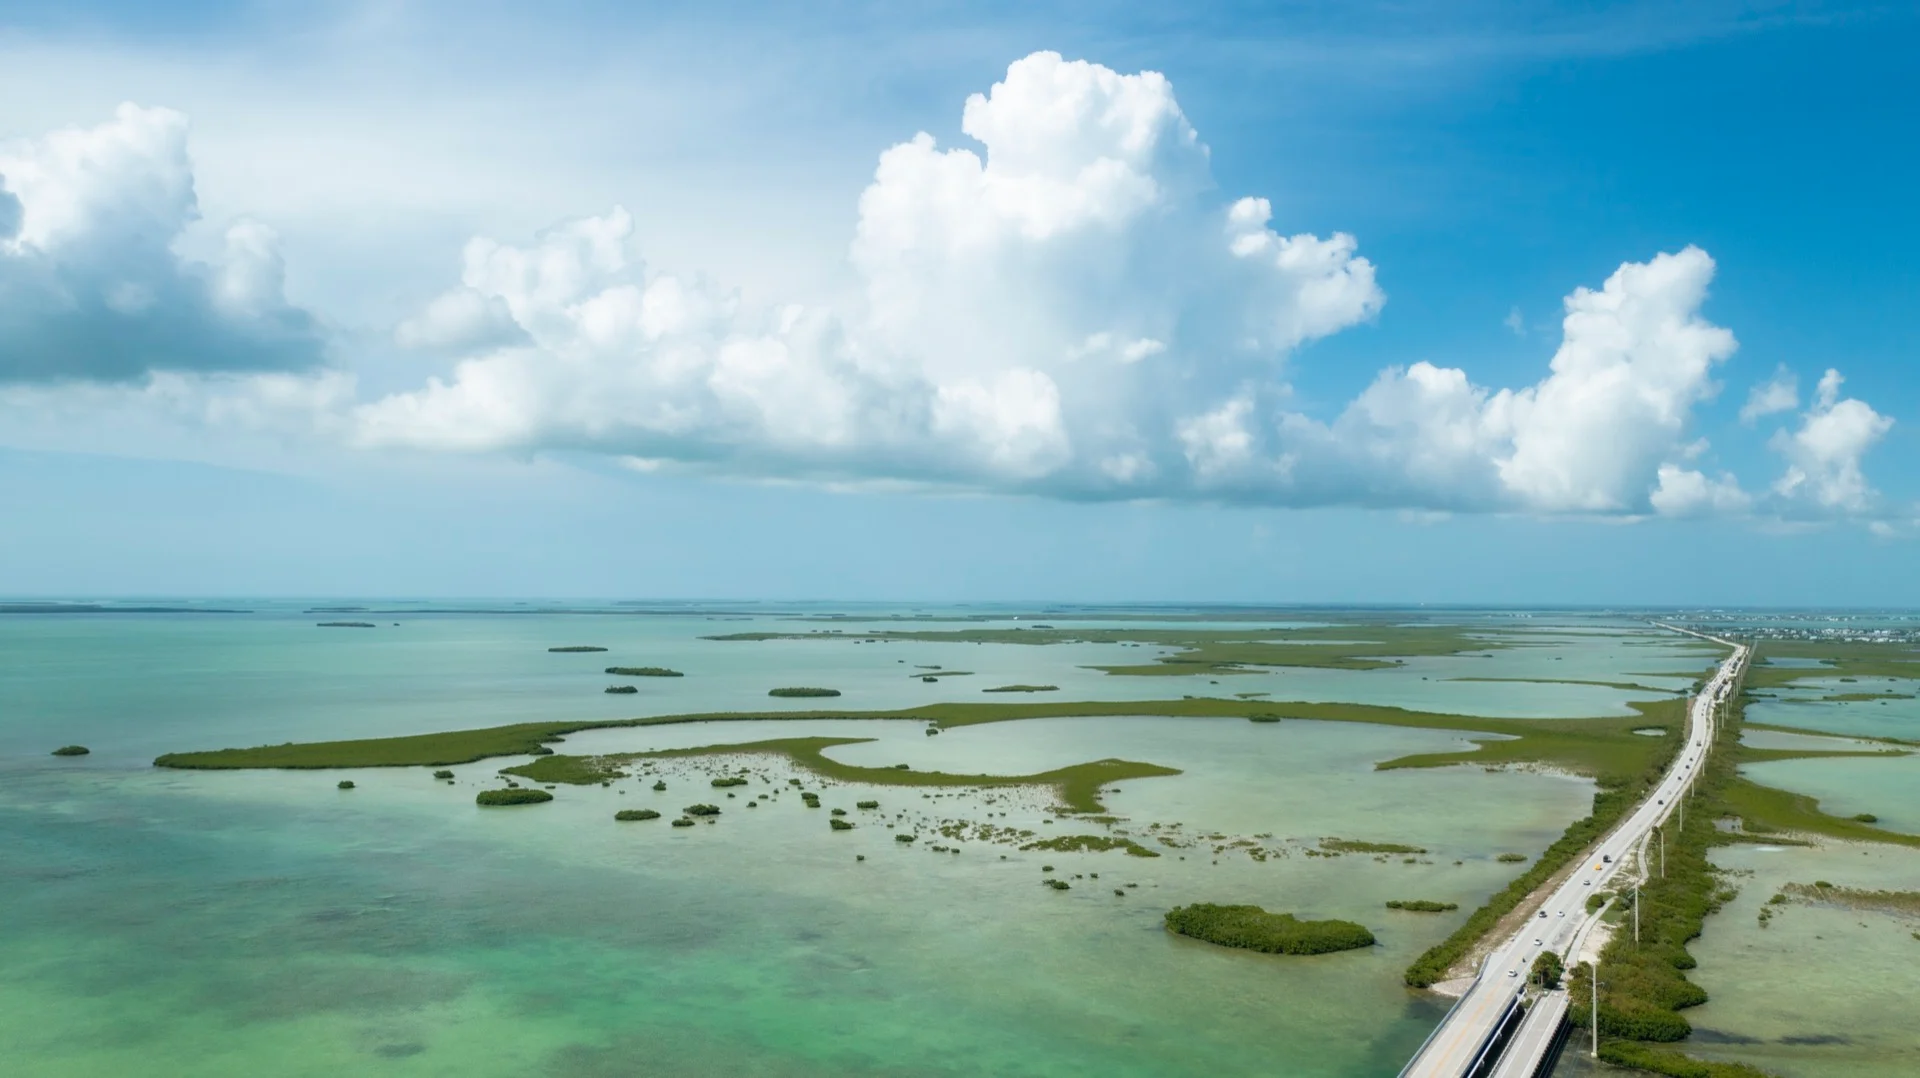 Driving from mainland Florida down the Overseas Highway, it's easy to understand why the southernmost leg of U.S. Highway 1 is often referred to as the "Highway that Goes to Sea."